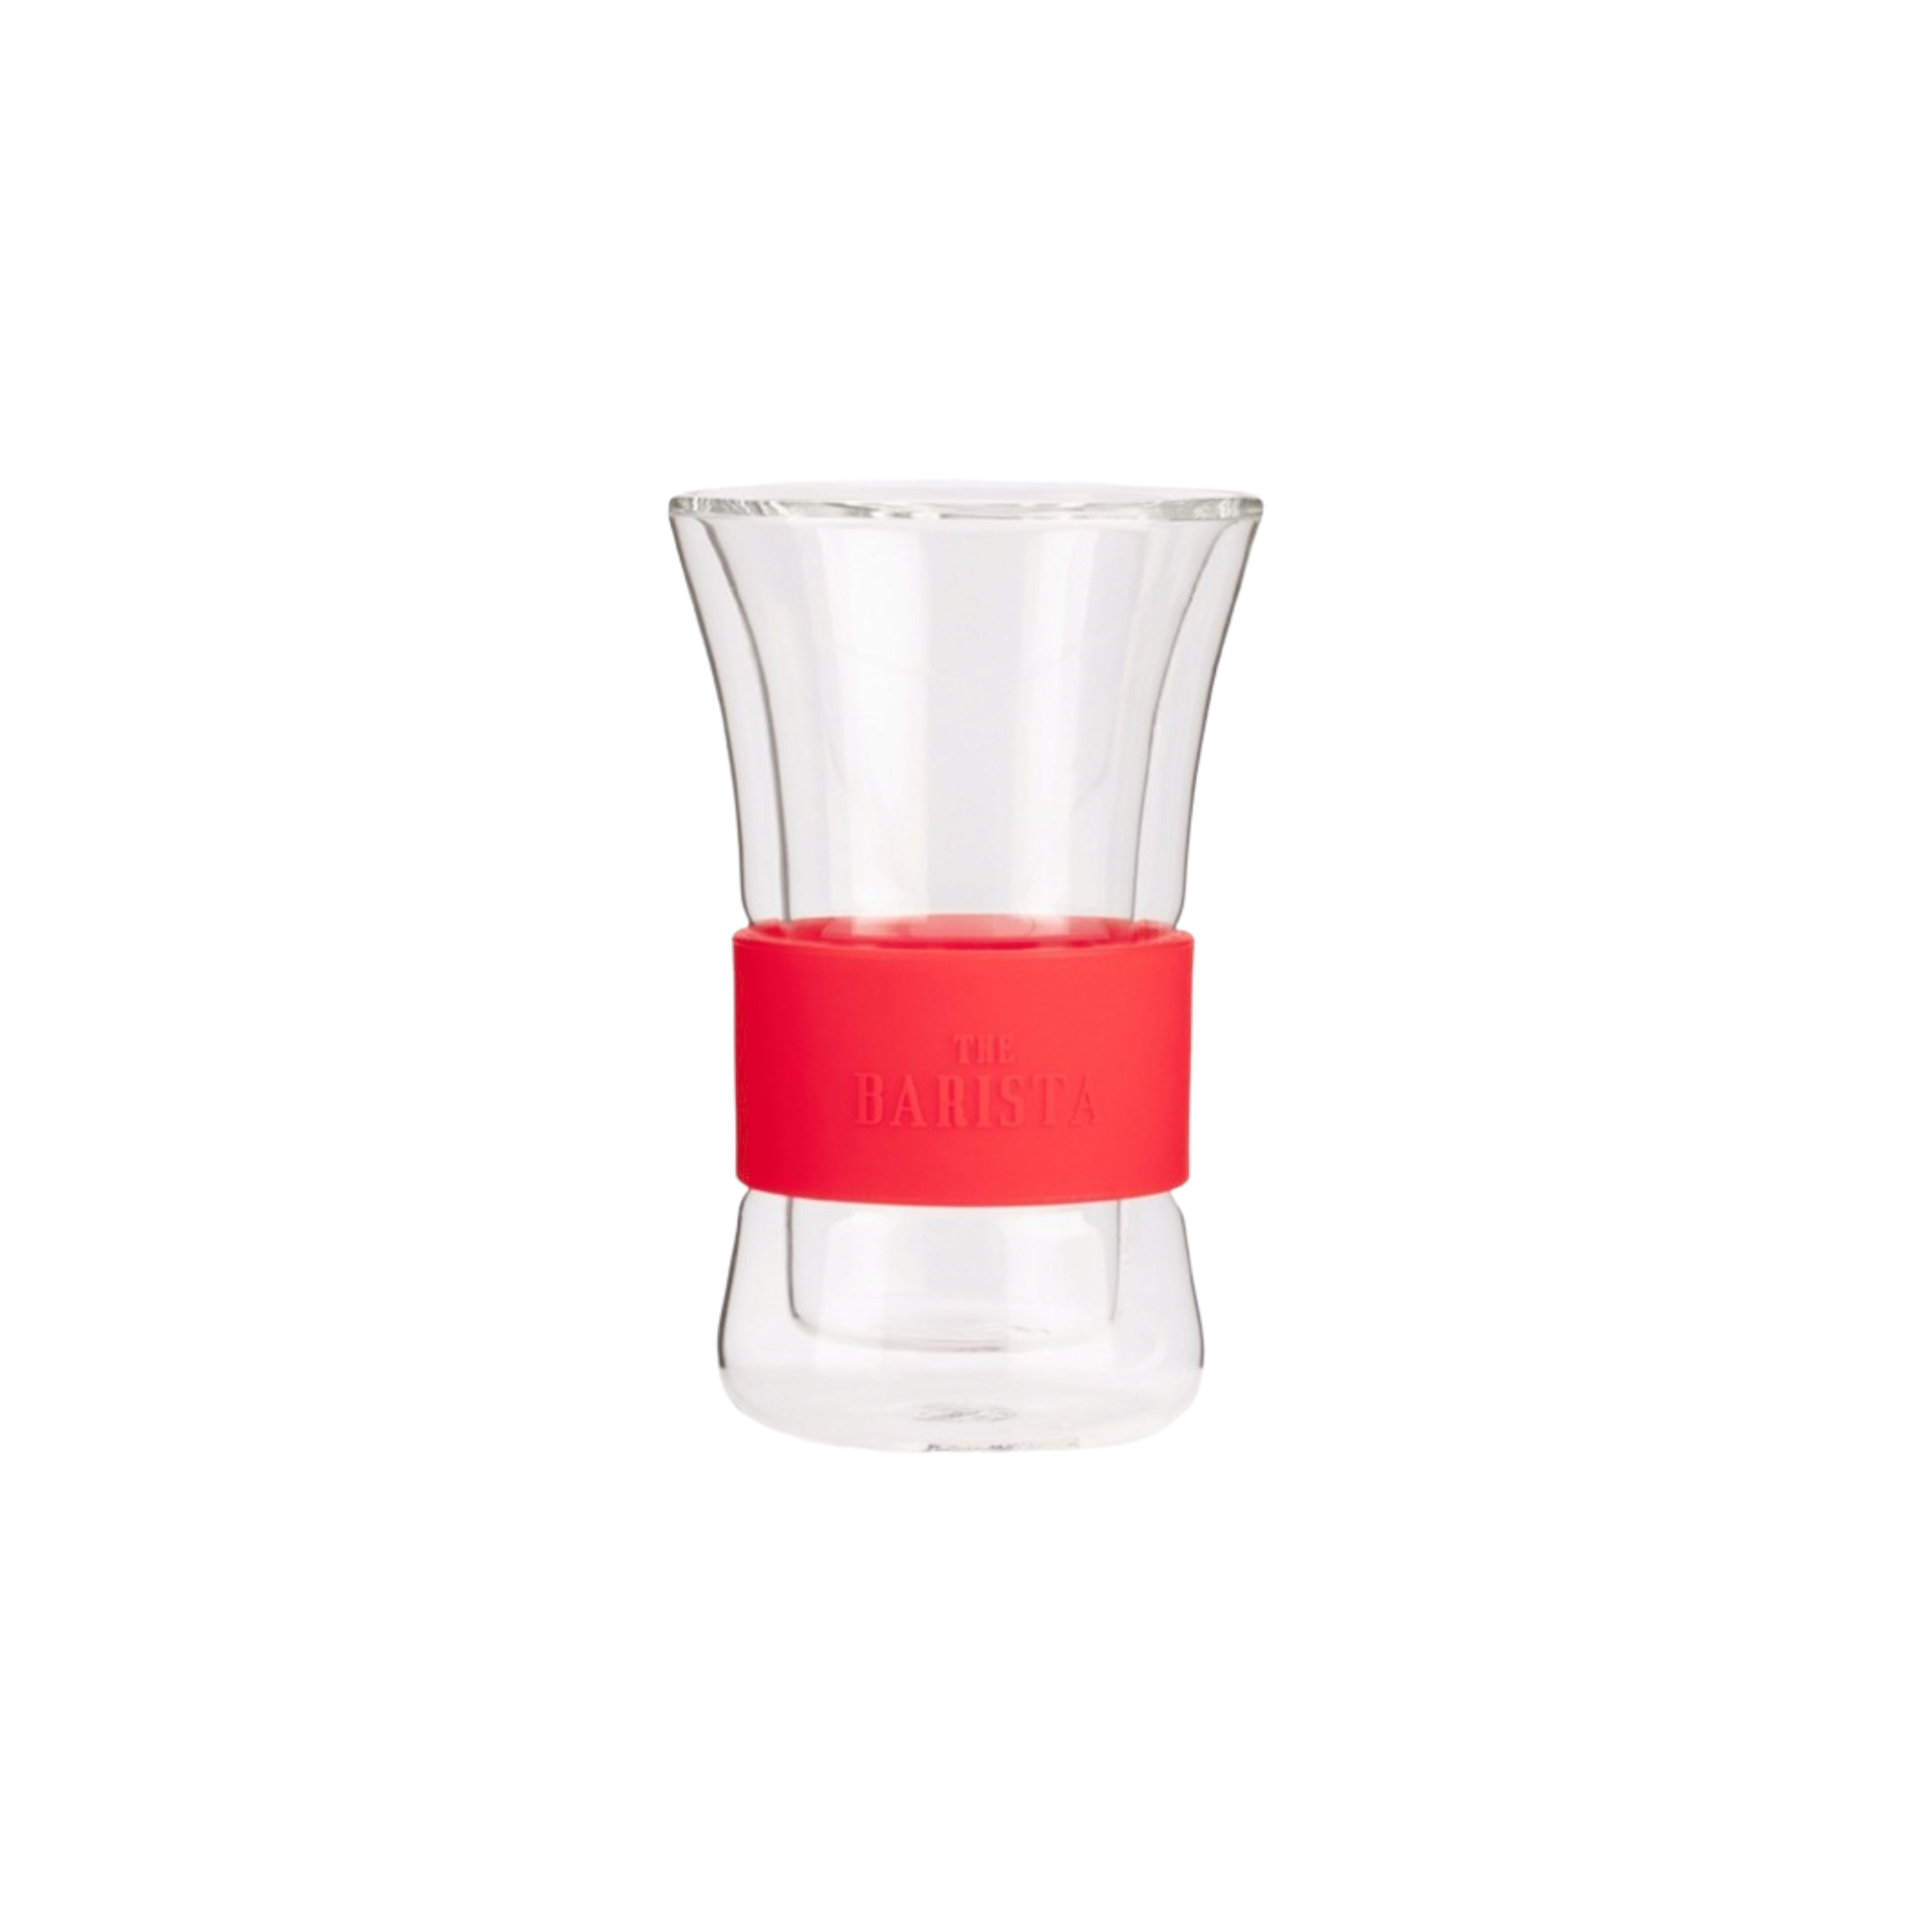 Barista Double Wall Café Cup 250ml with Color Silicone Grip 4pcs 11850A